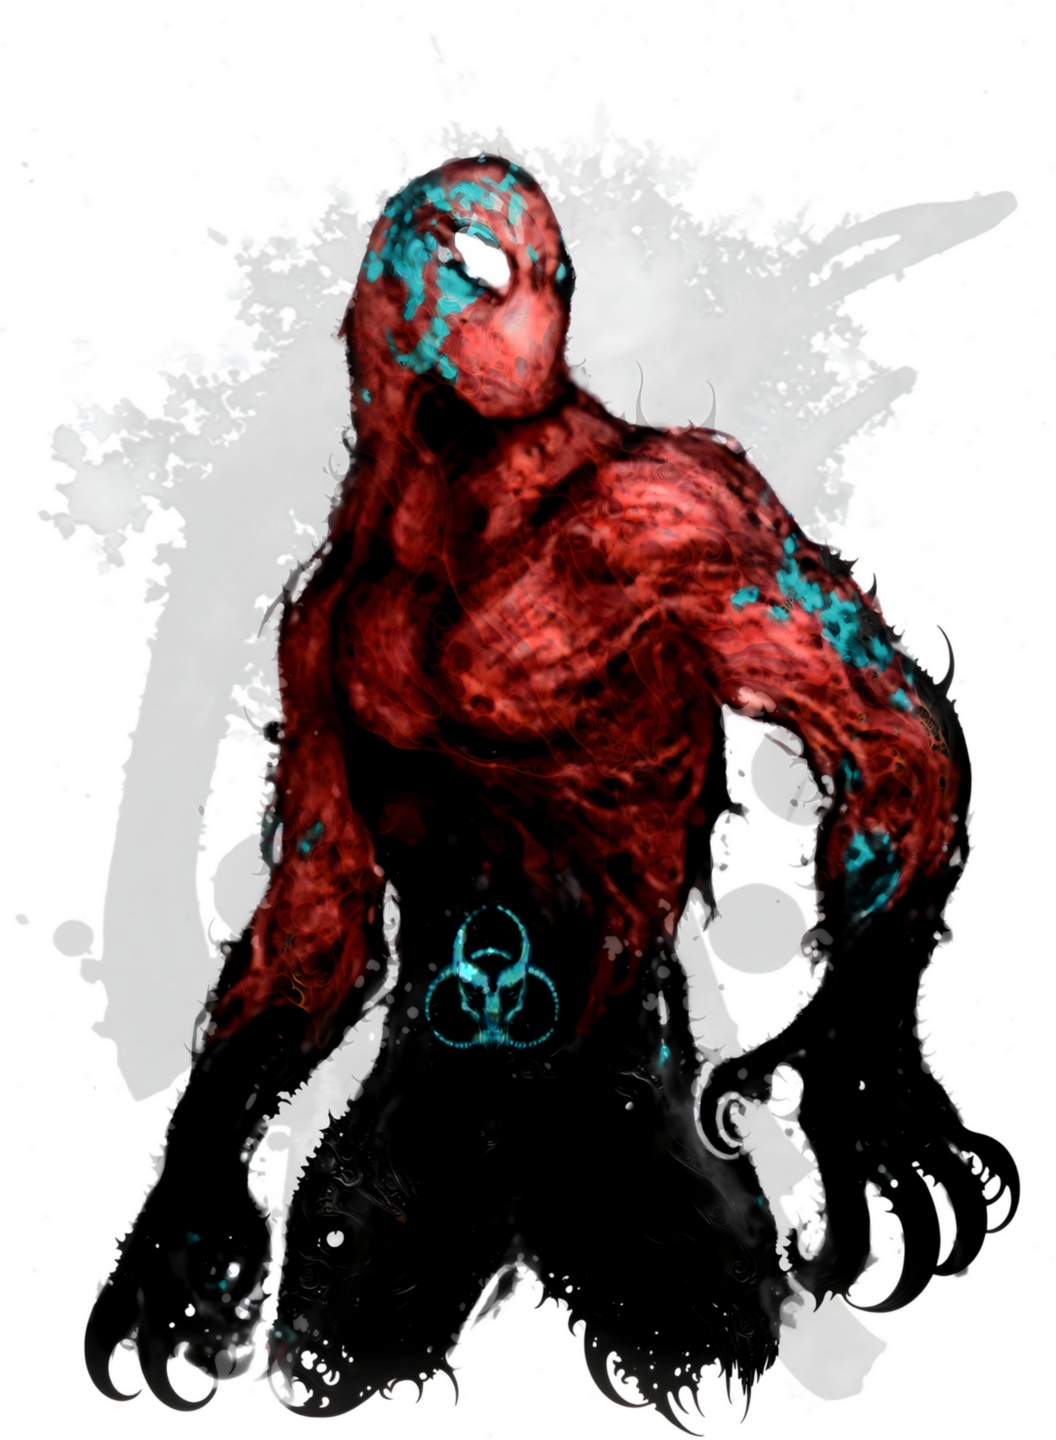 The Toxin Suit